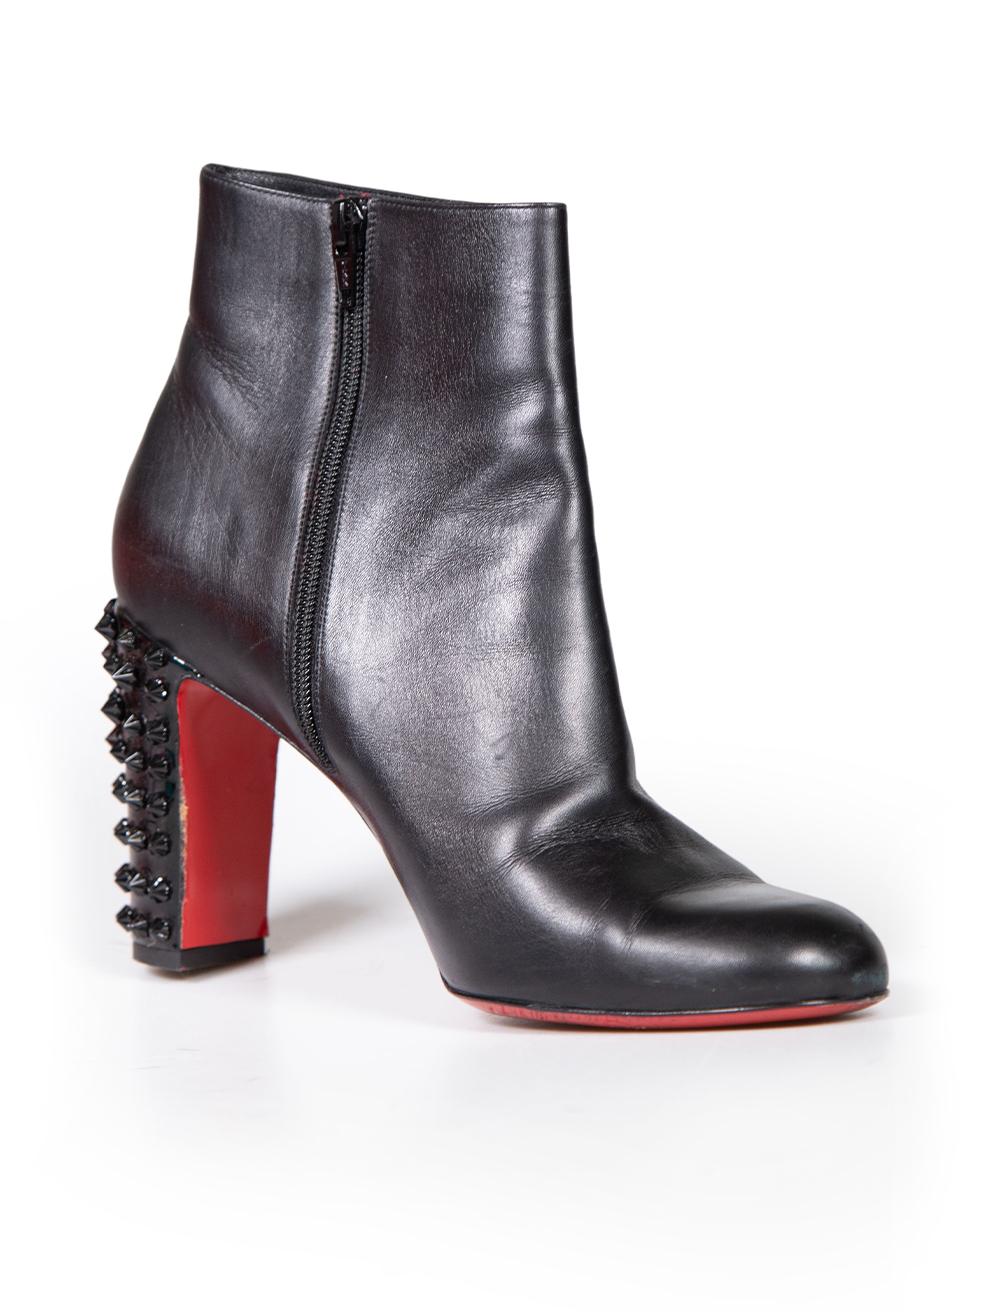 CONDITION is Very good. Minimal wear to boot is evident. Minimal wear to uppers with minor creasing. Missing spike on right heel and peeling of the outsole on the left heel on this used Christian Louboutin designer resale item. Comes with original